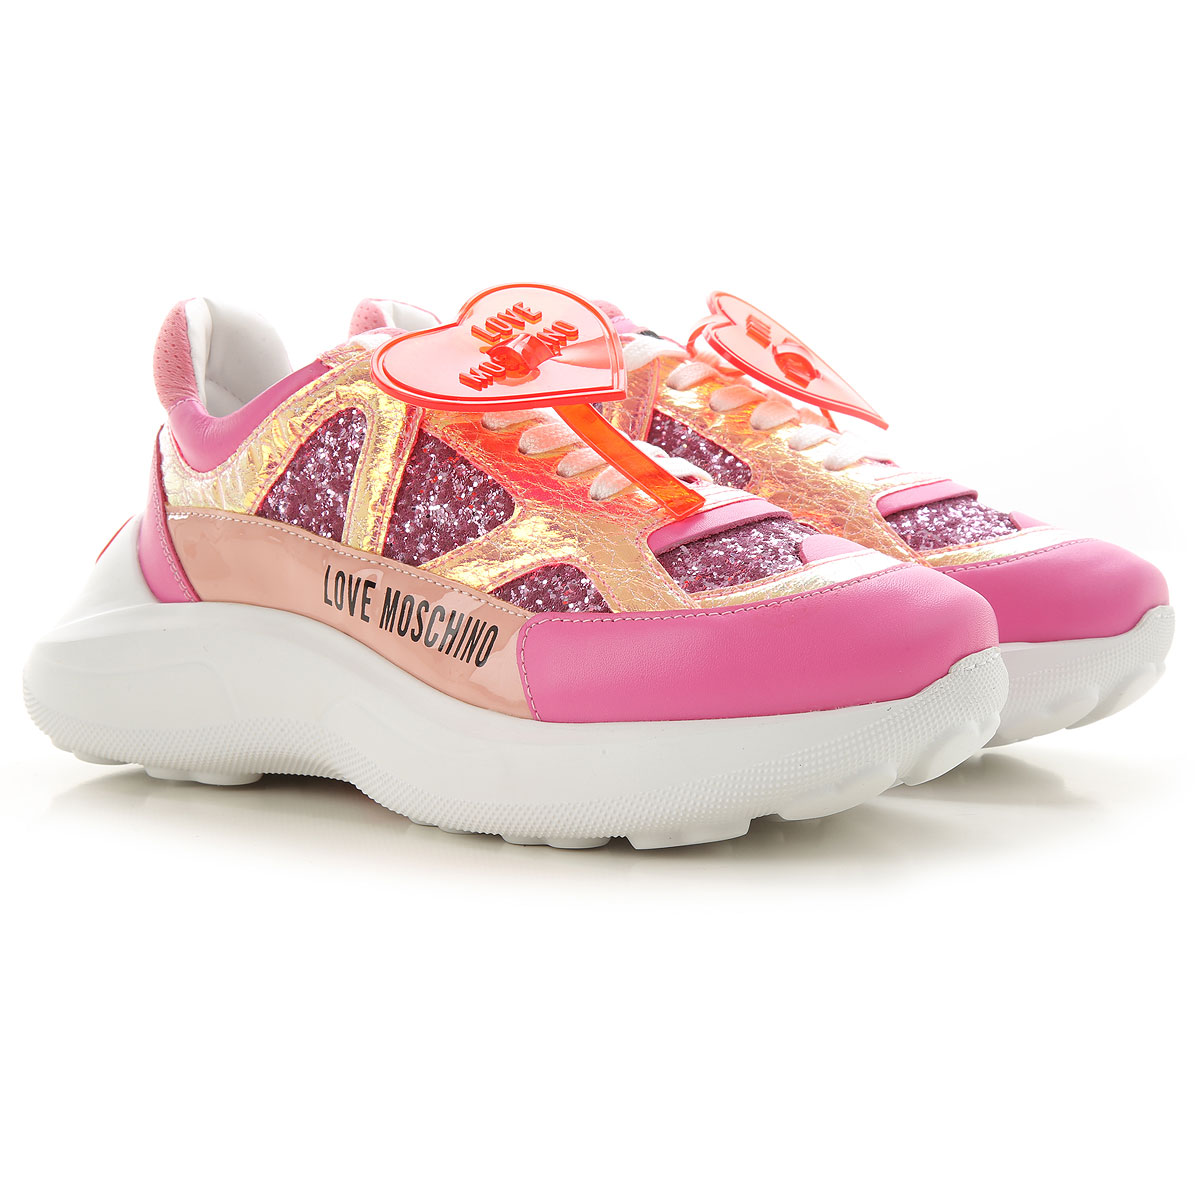 moschino sneakers 2019